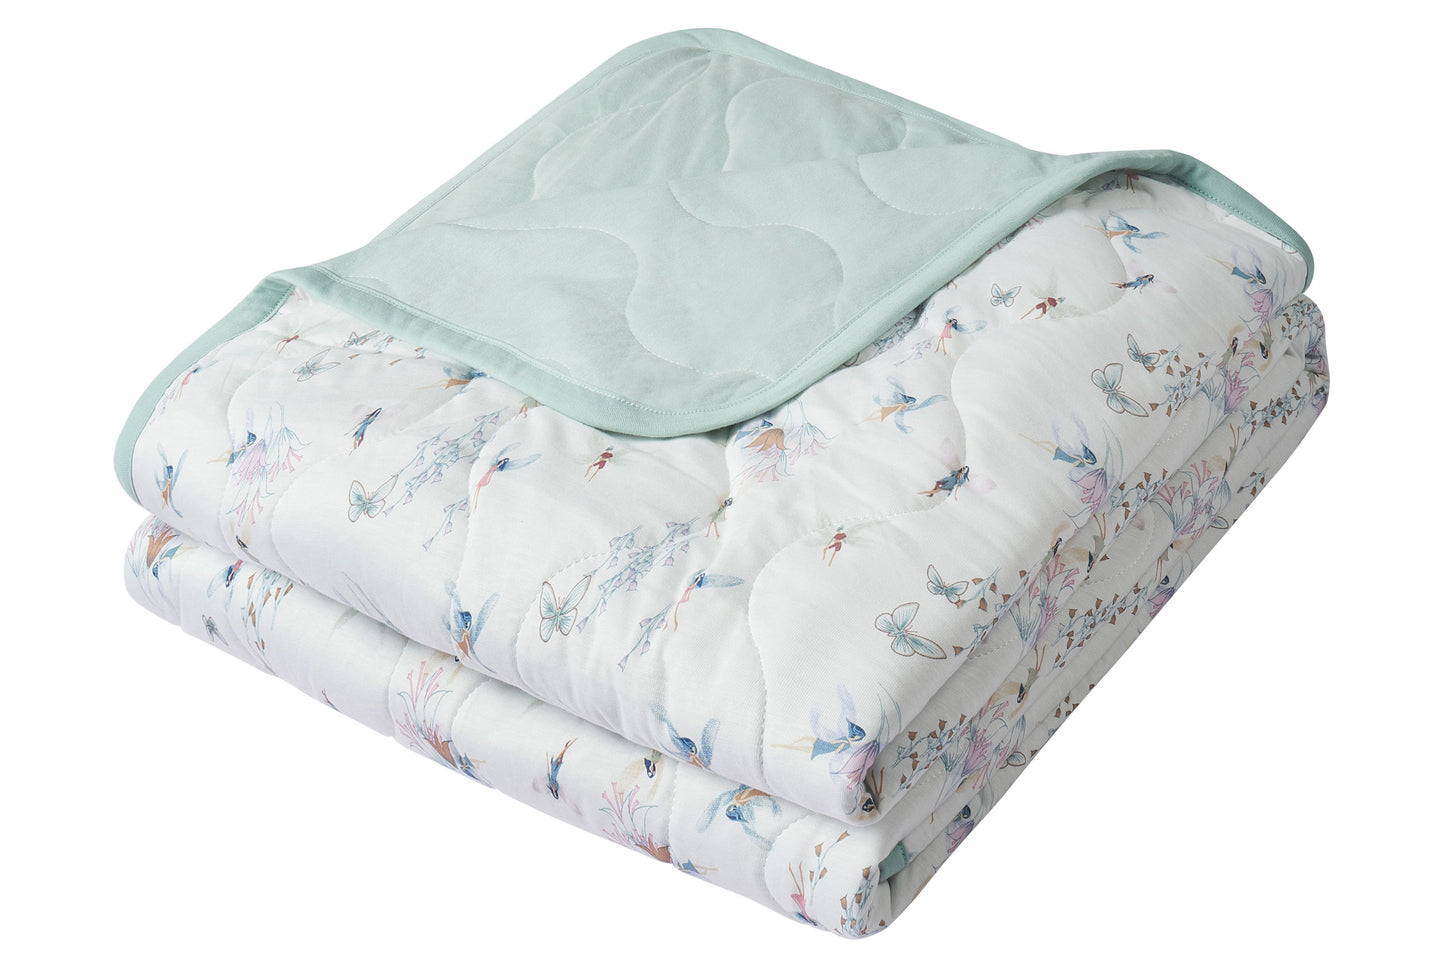 Large Cozy Quilted Blanket (Bamboo Jersey) - Fairy Tale